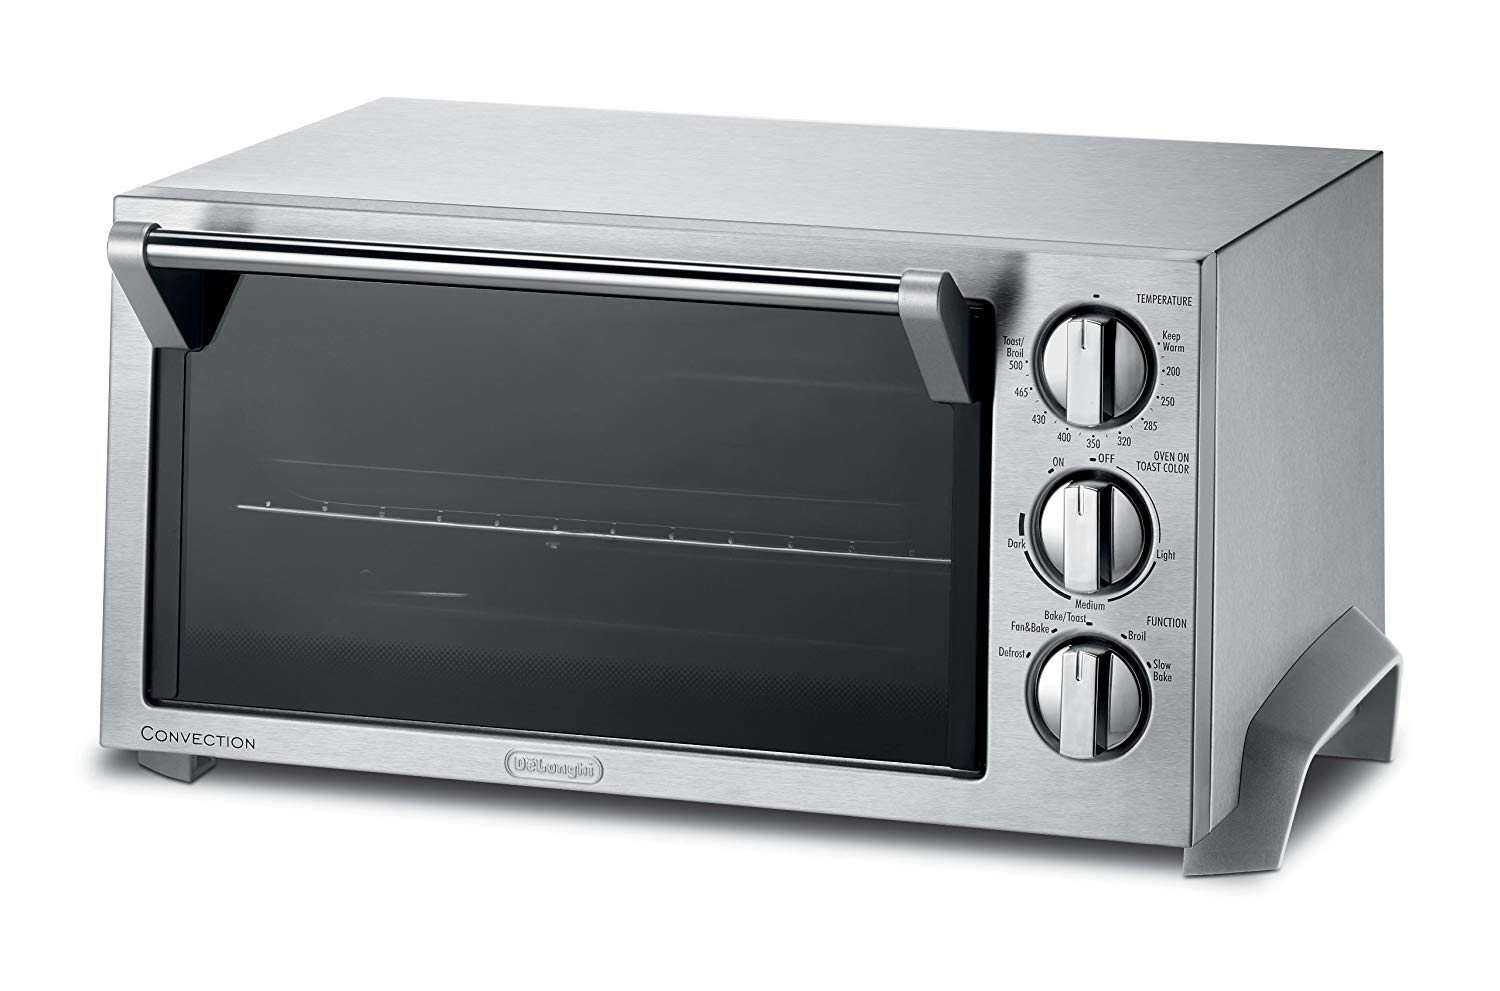 An image of DeLonghi EO1270 Silver Convection Large Six Slice Toaster Oven